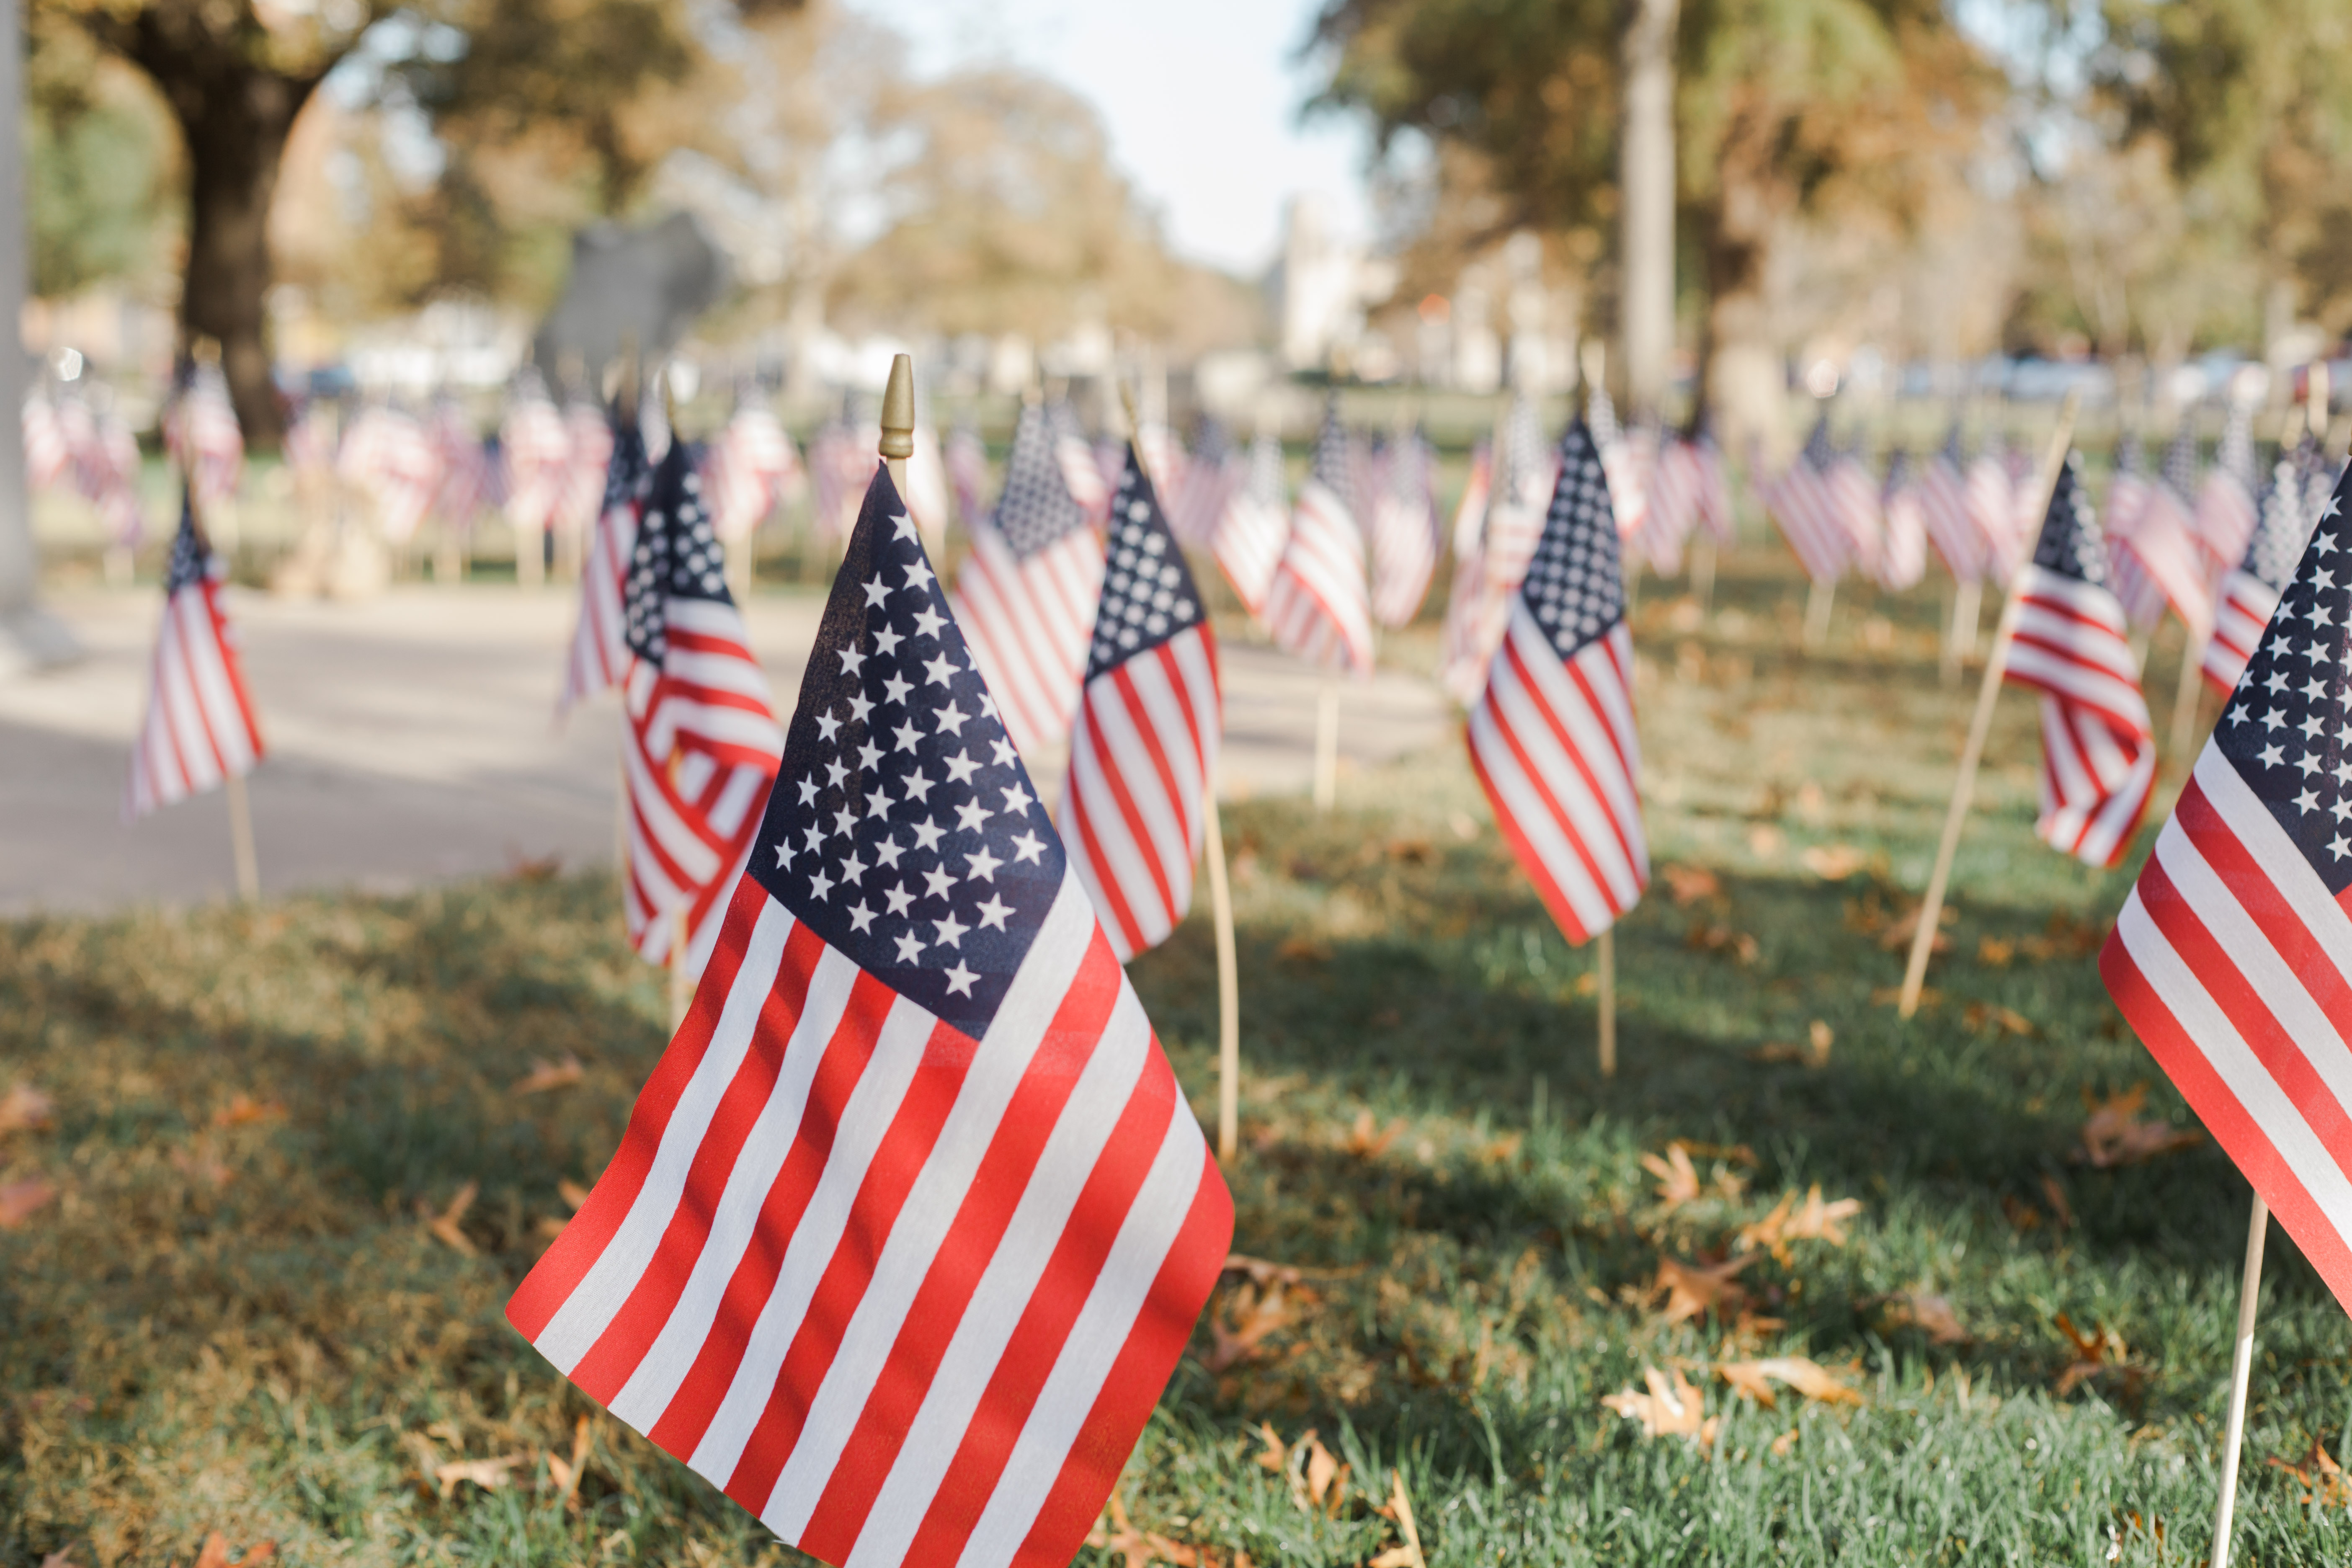 American flags in ground across campus